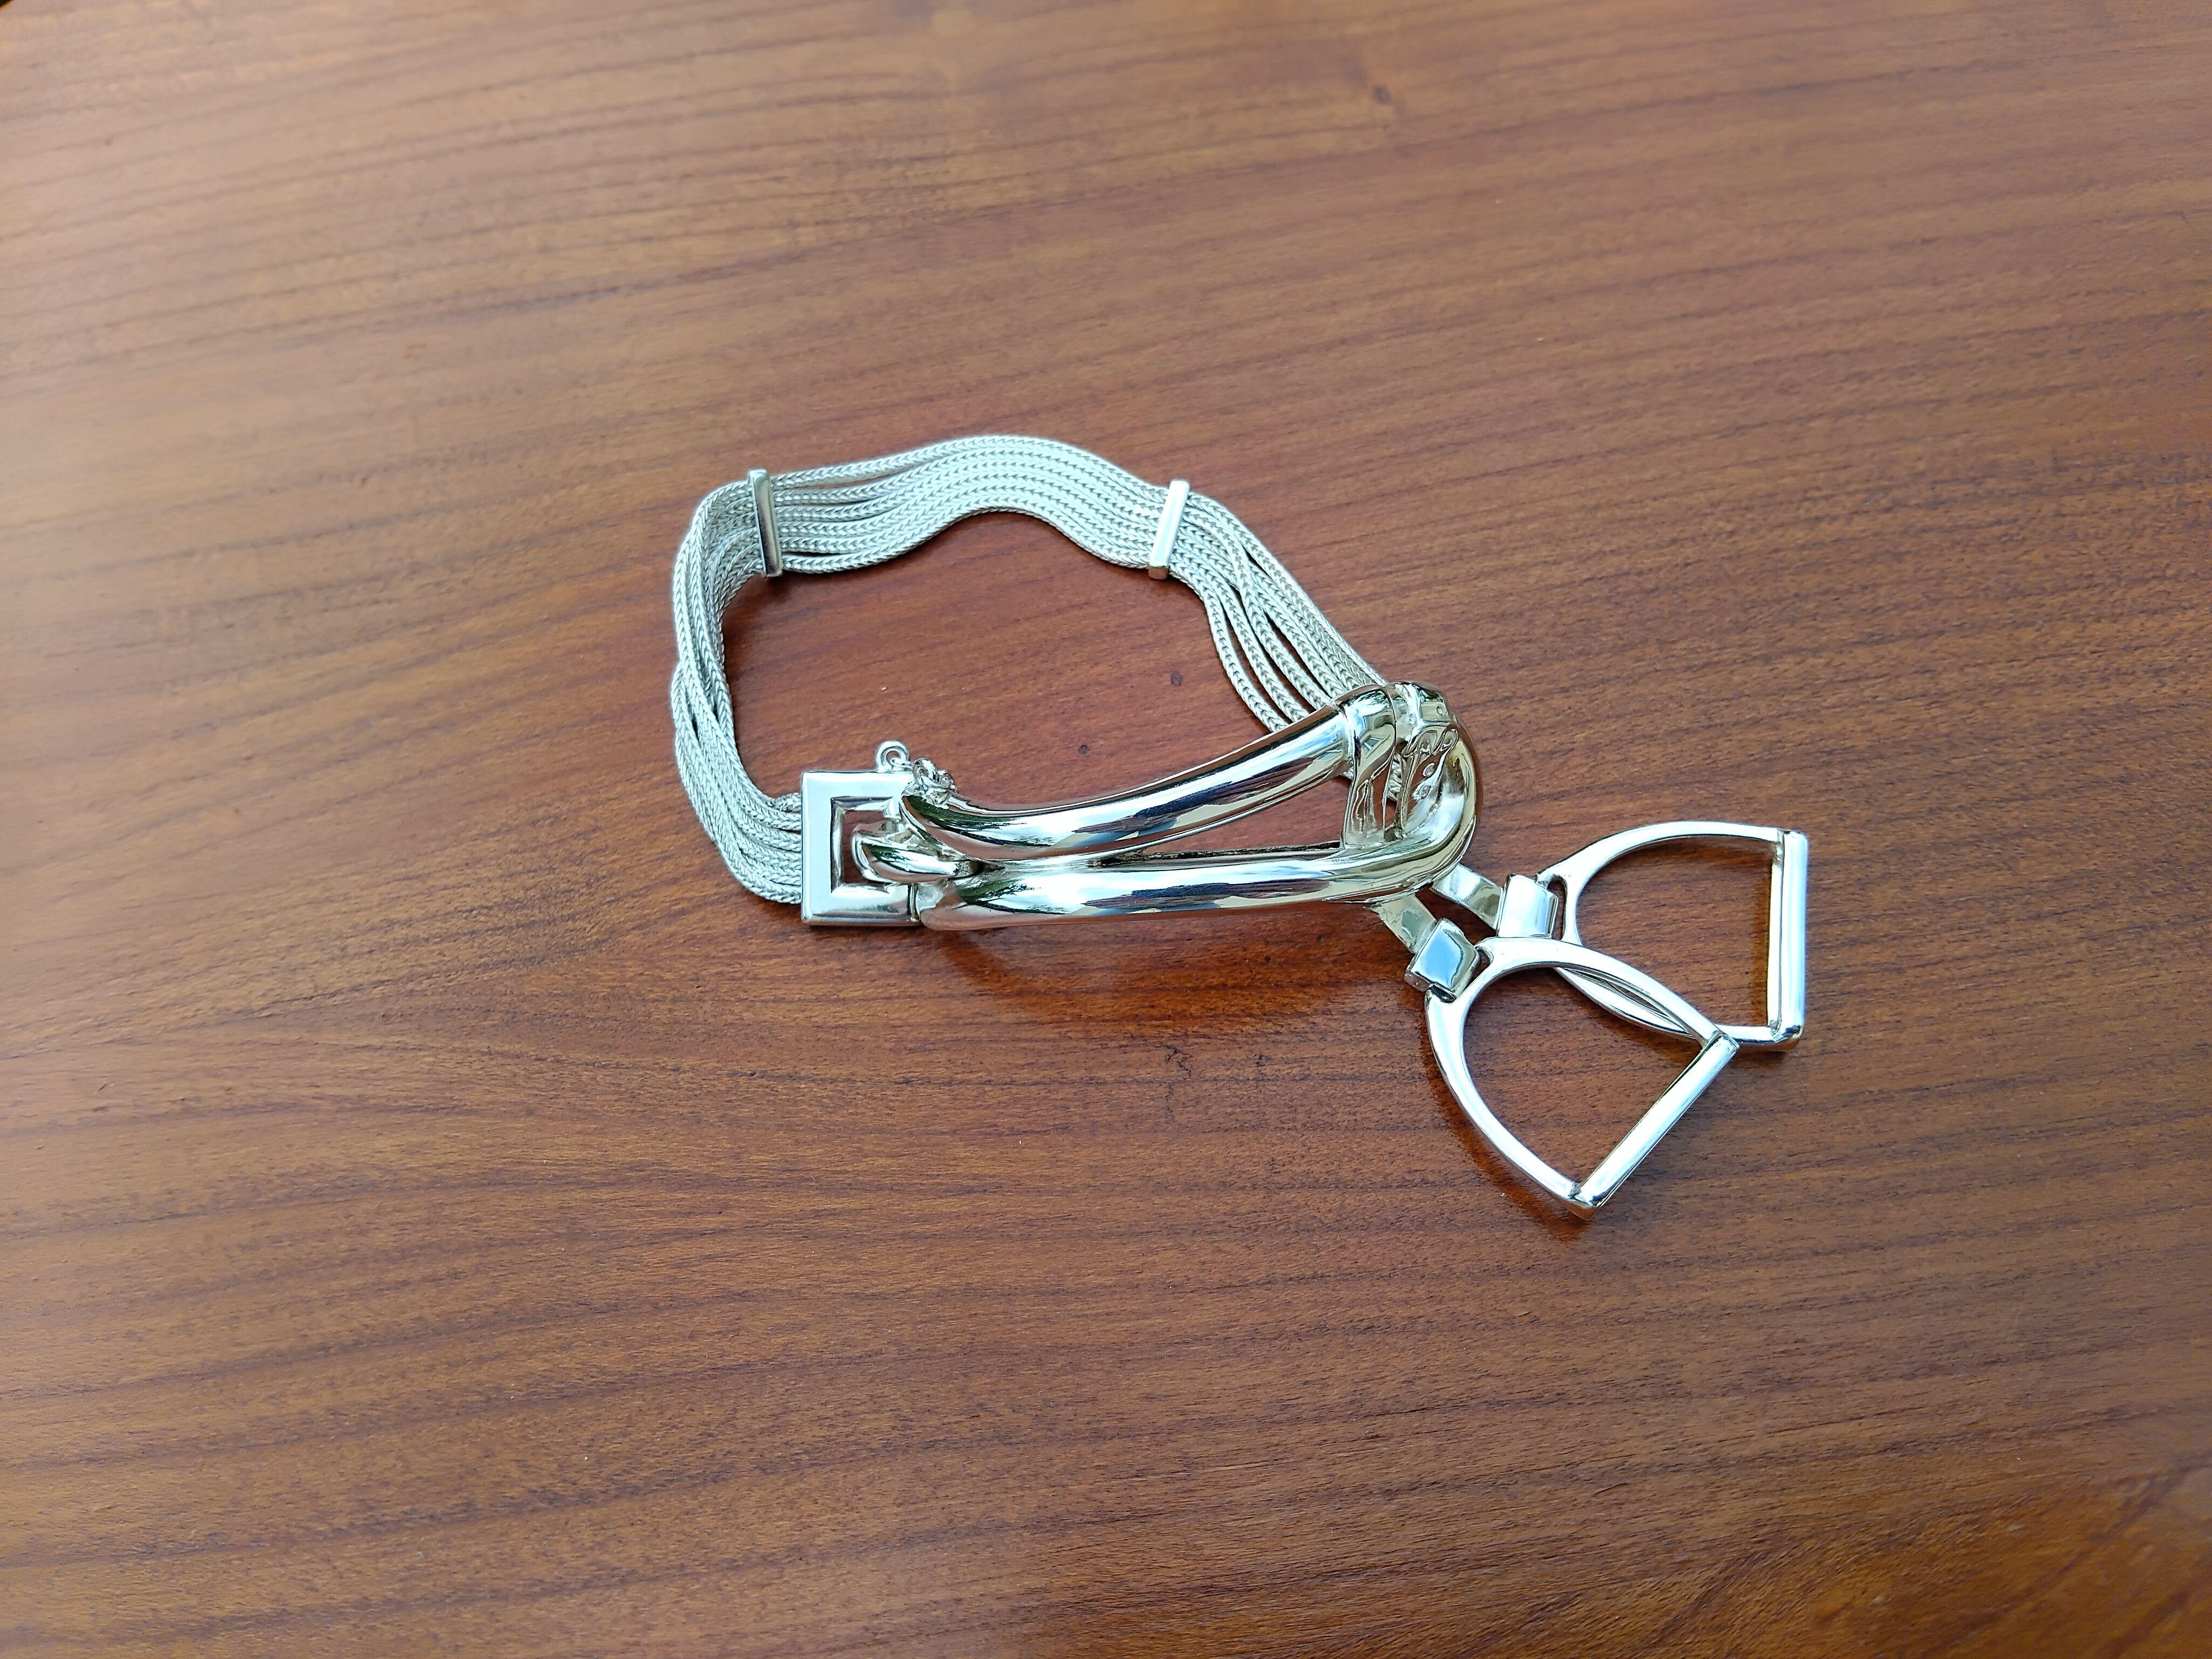 Exceptional Hermès Bracelet Equestrian Theme Stirrups Charms in Silver Texas  For Sale 5